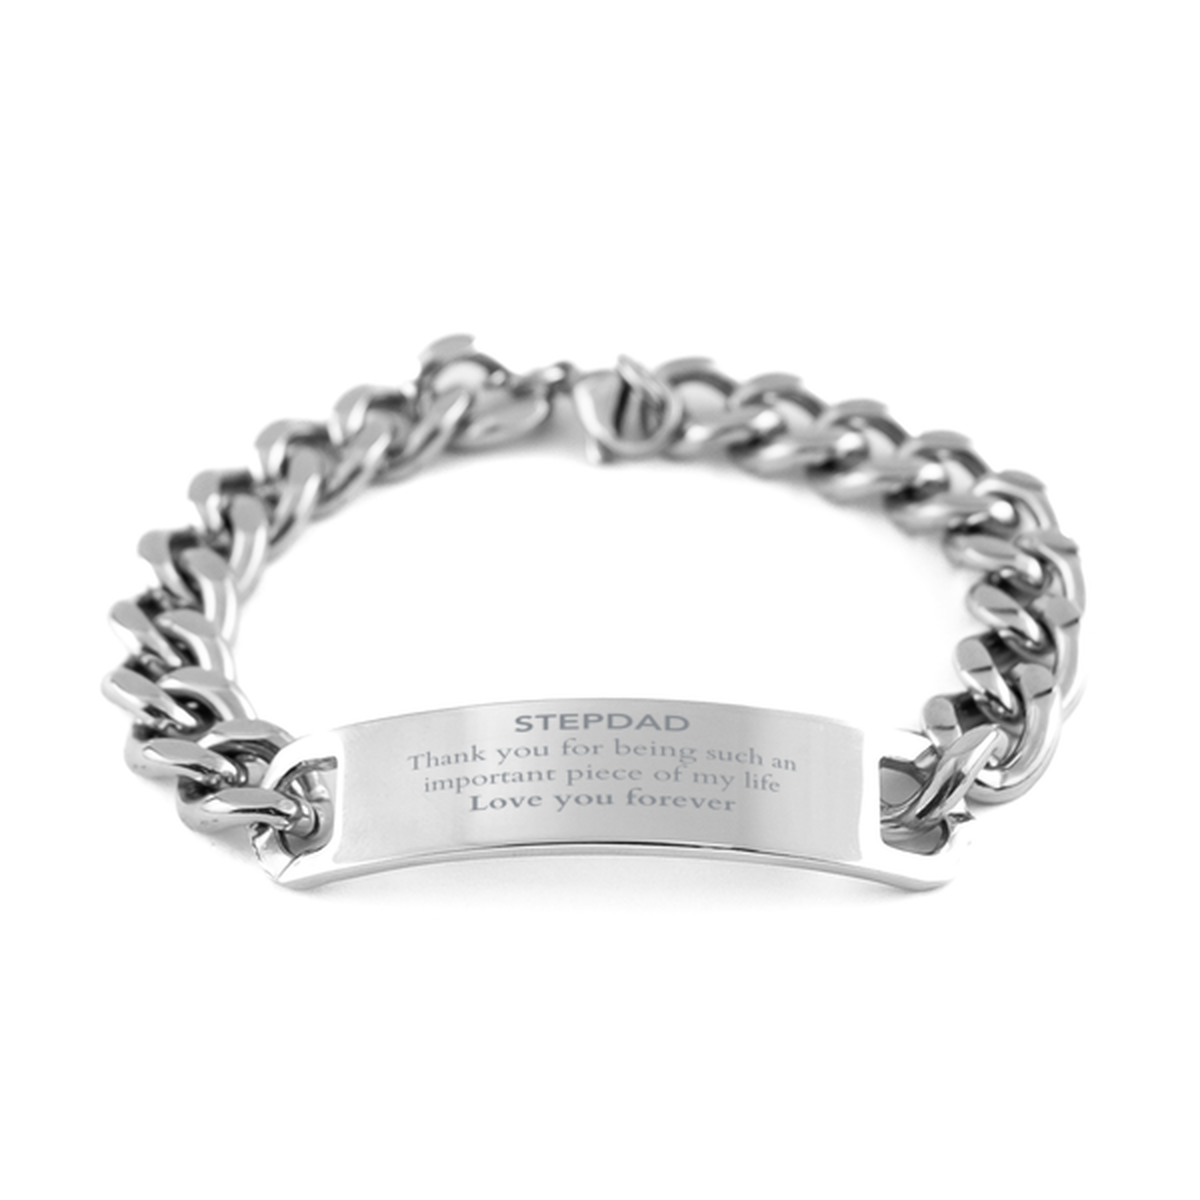 Appropriate Stepdad Cuban Chain Stainless Steel Bracelet Epic Birthday Gifts for Stepdad Thank you for being such an important piece of my life Stepdad Christmas Mothers Fathers Day